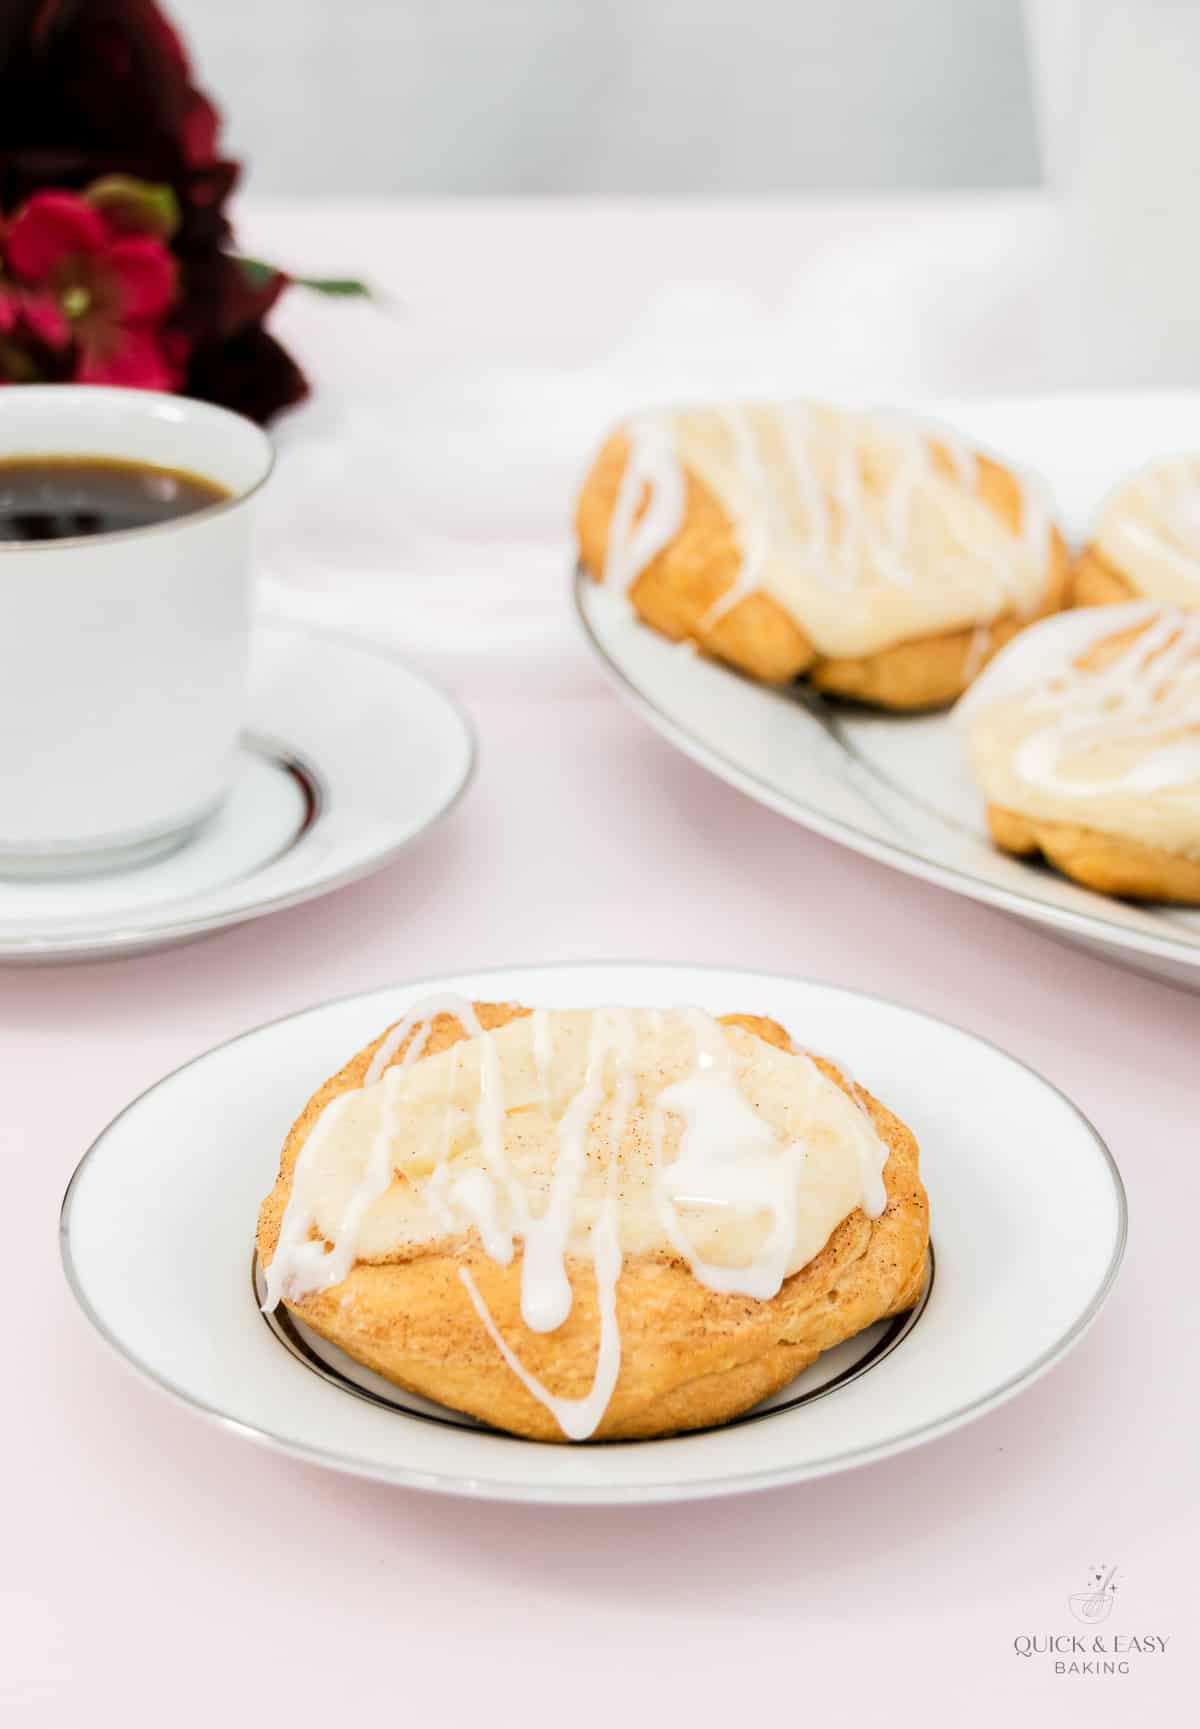 Cream cheese danish on a plate with coffee.